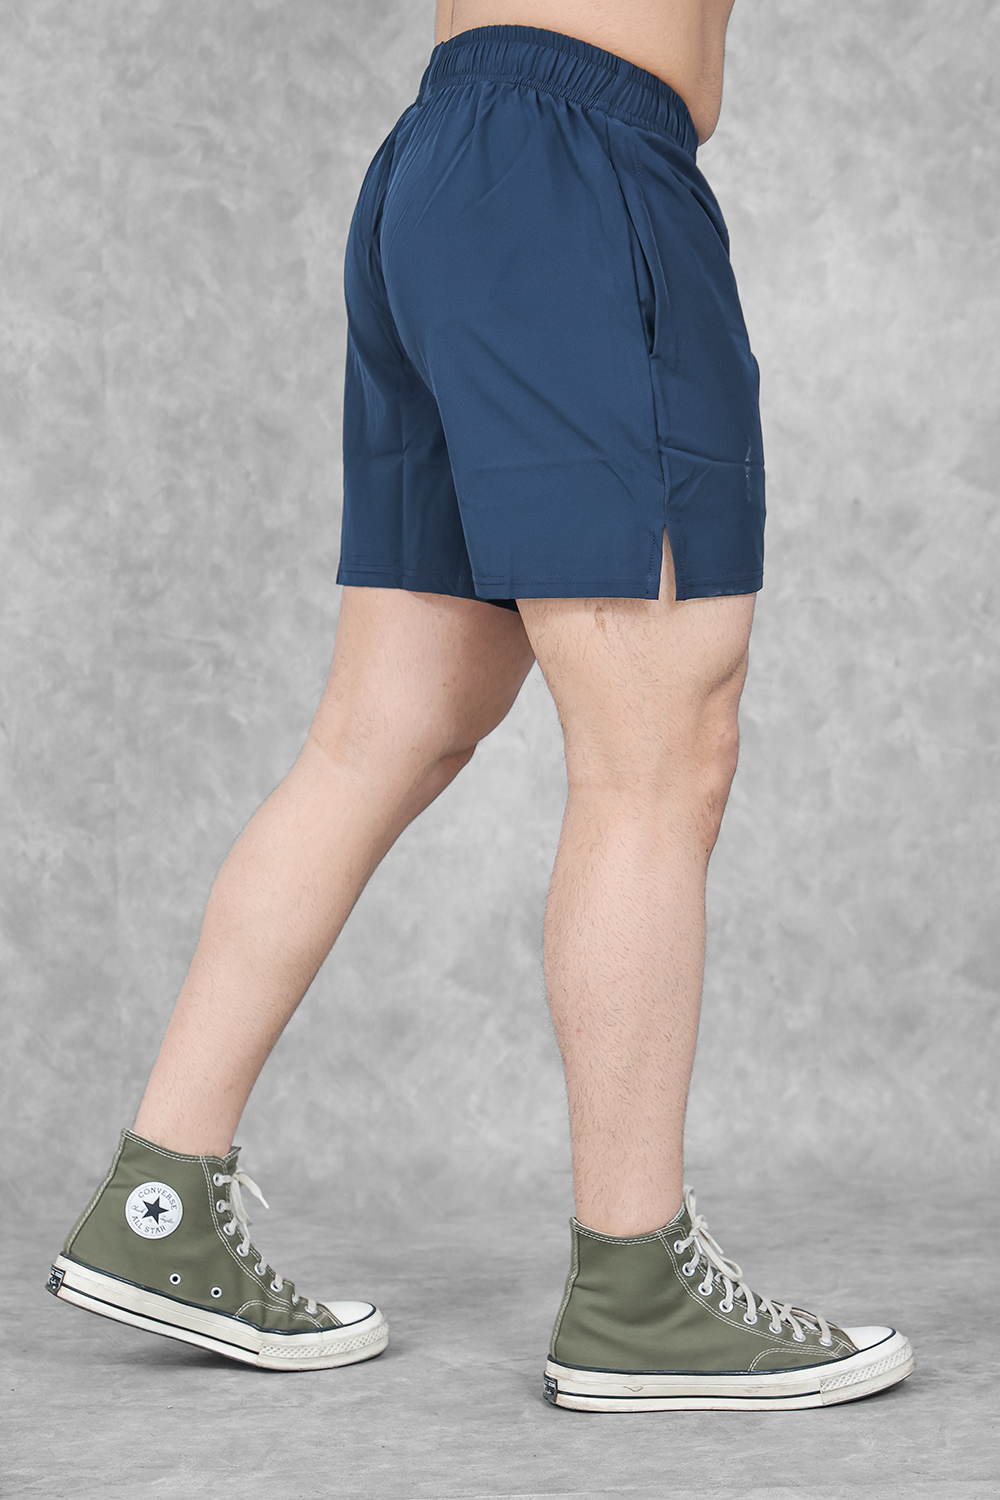 Dry-Fit Woven shorts- Navy